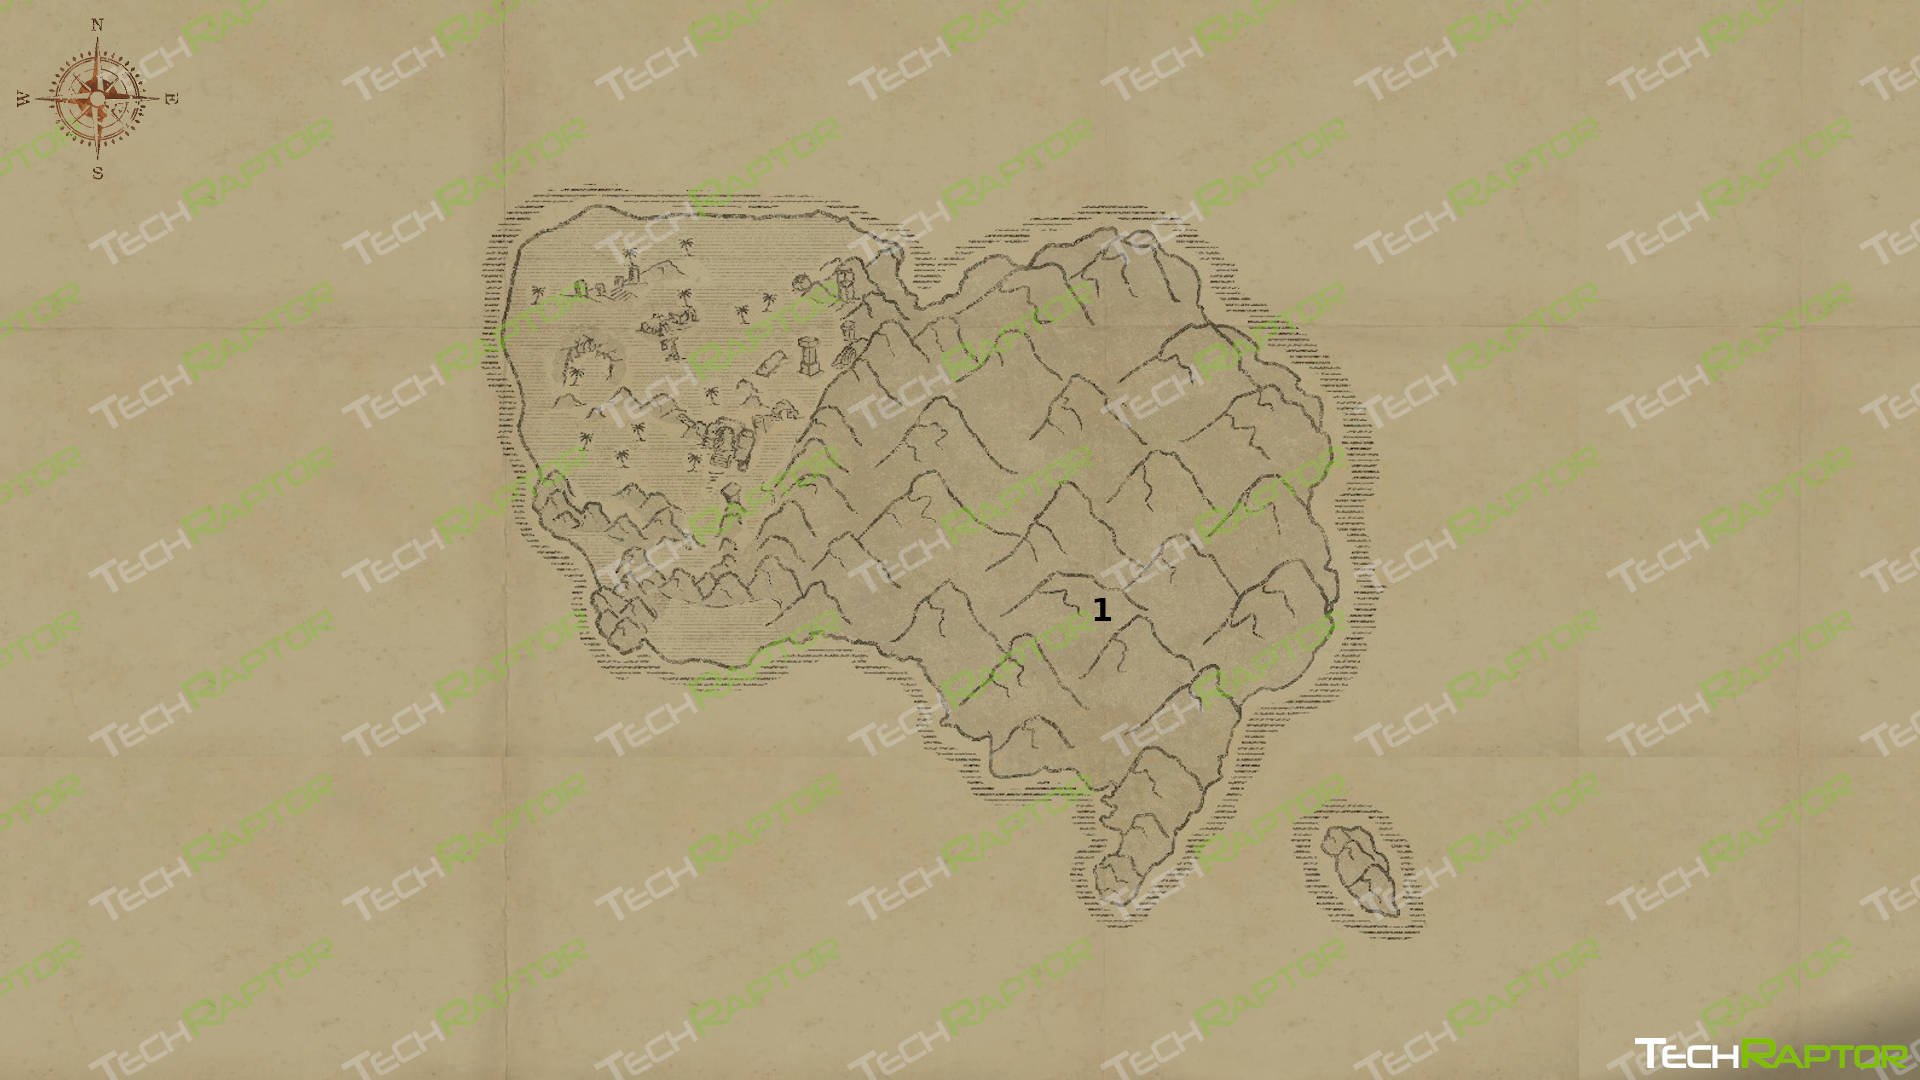 Survival: Fountain of Youth Chronicles Locations Map Guide - Windy Island Map